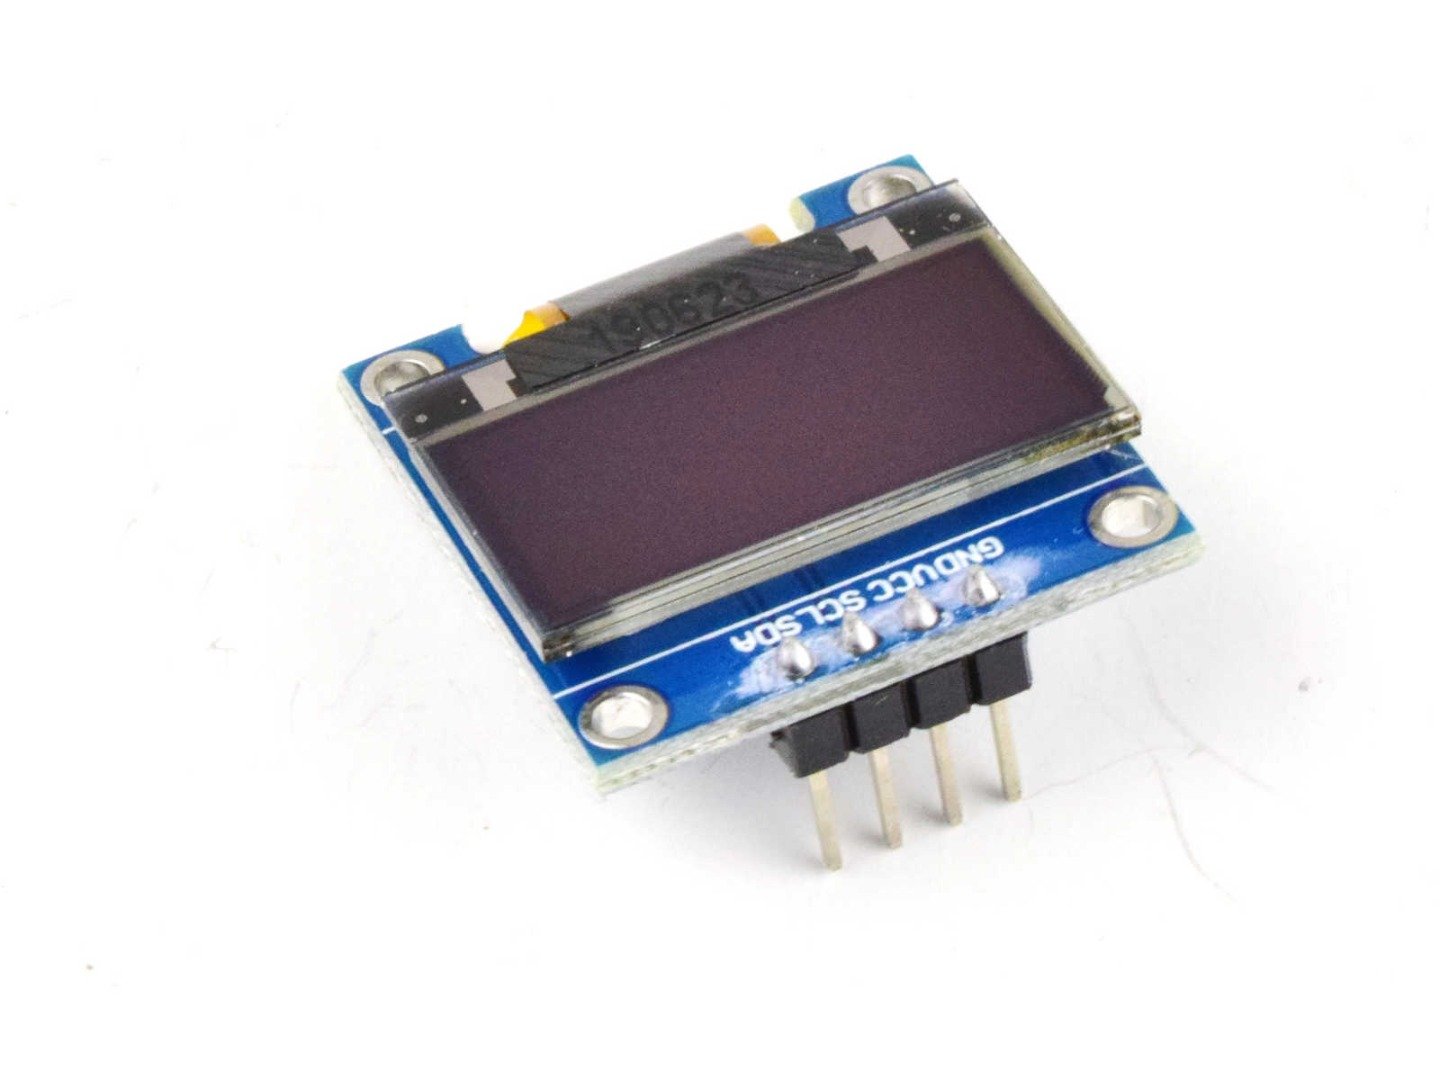 OLED 128×64 Pixel, I2C, 0.96 inch, SSD1306 SH1106, 3-5V (100% compatible with Arduino) 10